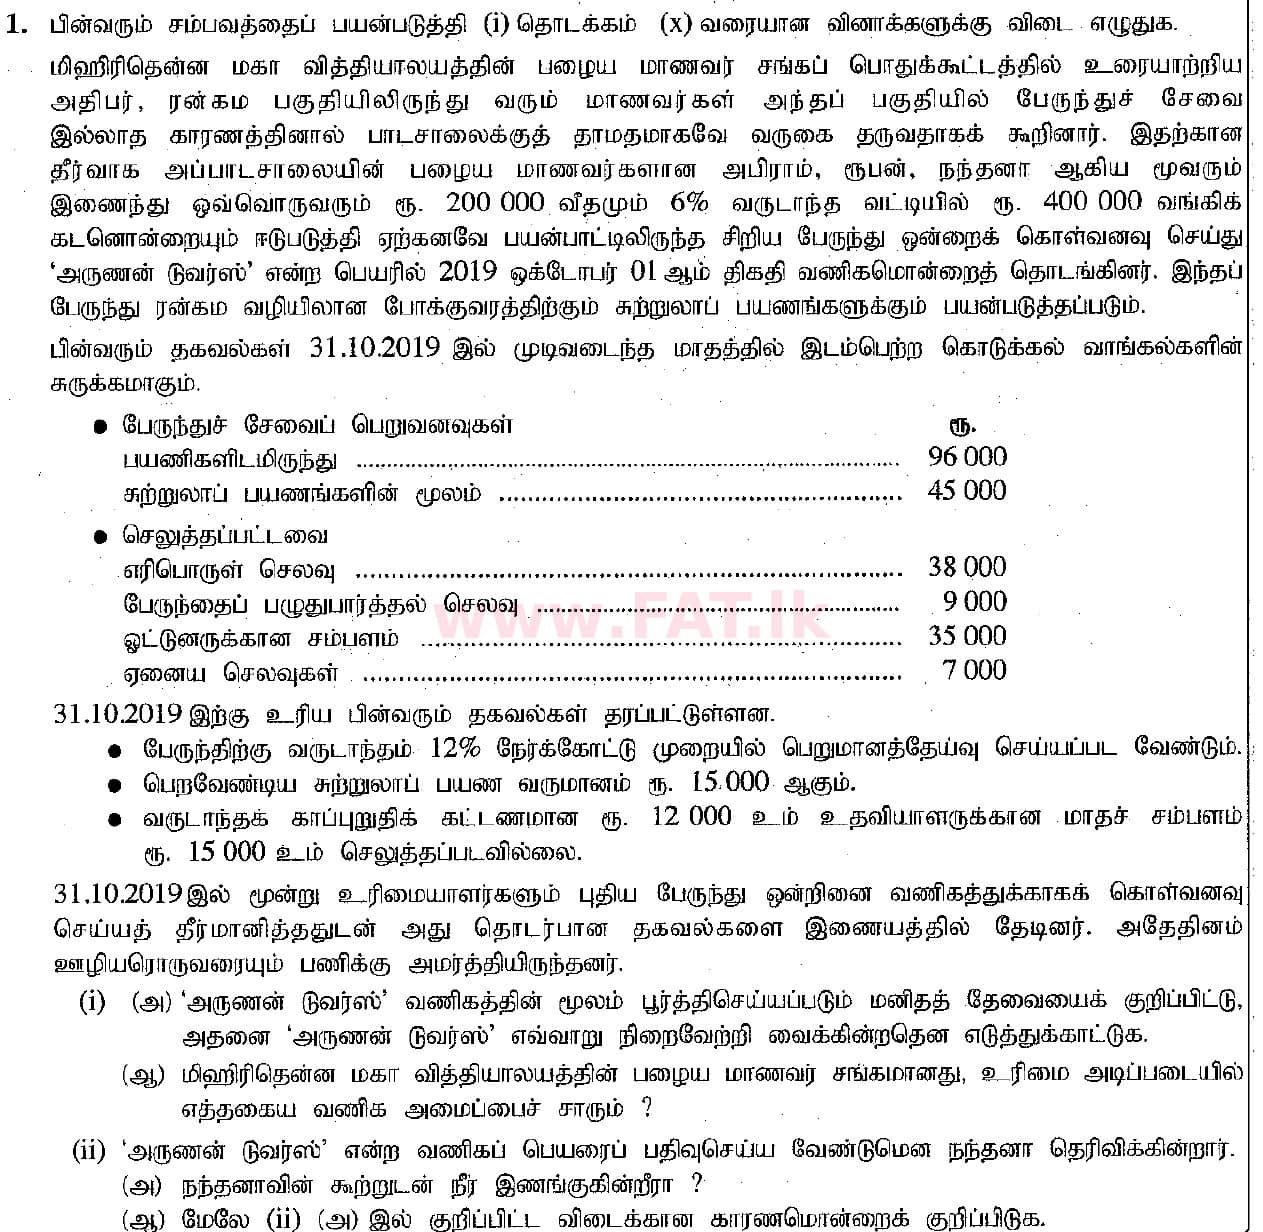 National Syllabus : Ordinary Level (O/L) Business and Accounting Studies - 2019 March - Paper II (தமிழ் Medium) 1 1